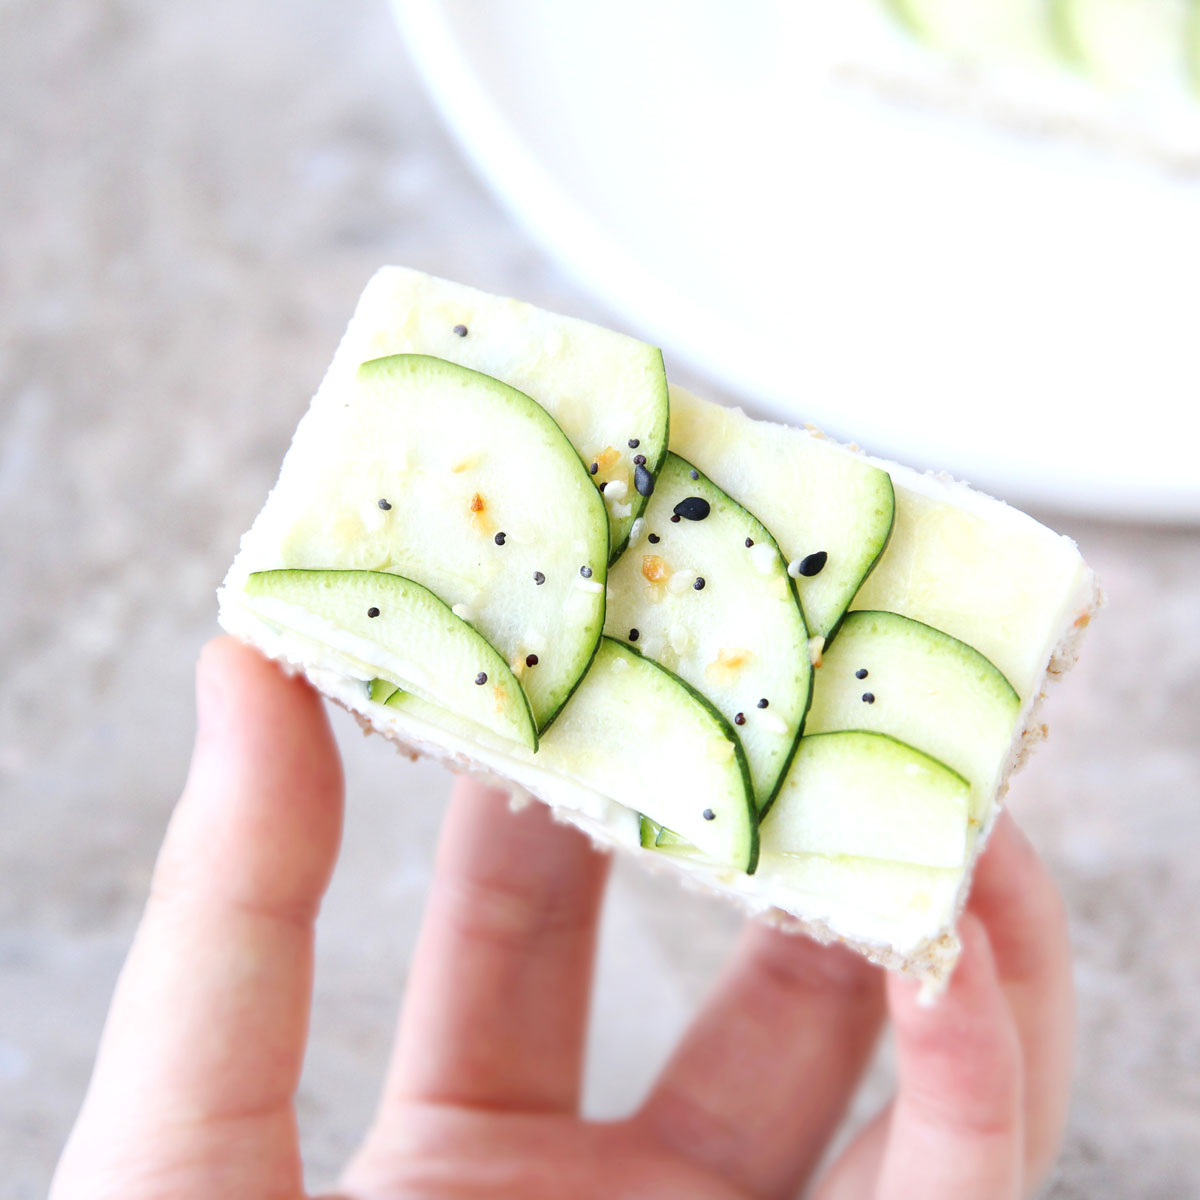 How to Make Zucchini Finger Sandwiches for Tea and Picnics - Sweet Matcha Whipped Cream